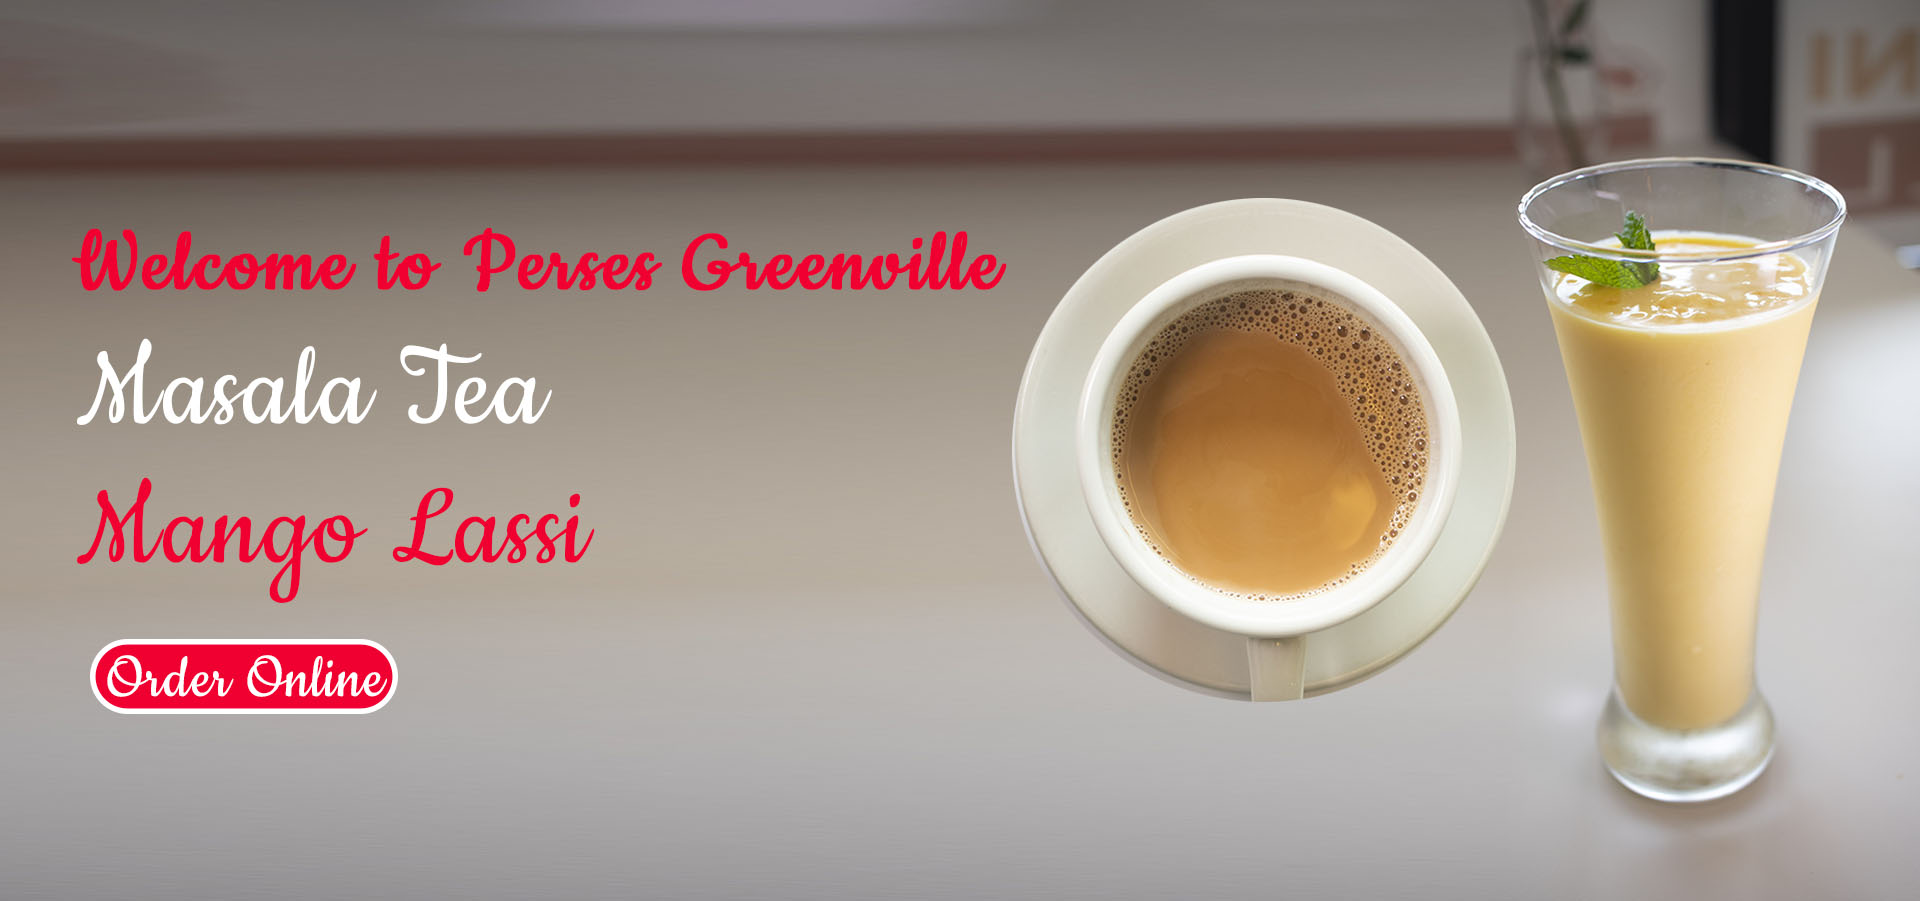 Perses Greenville